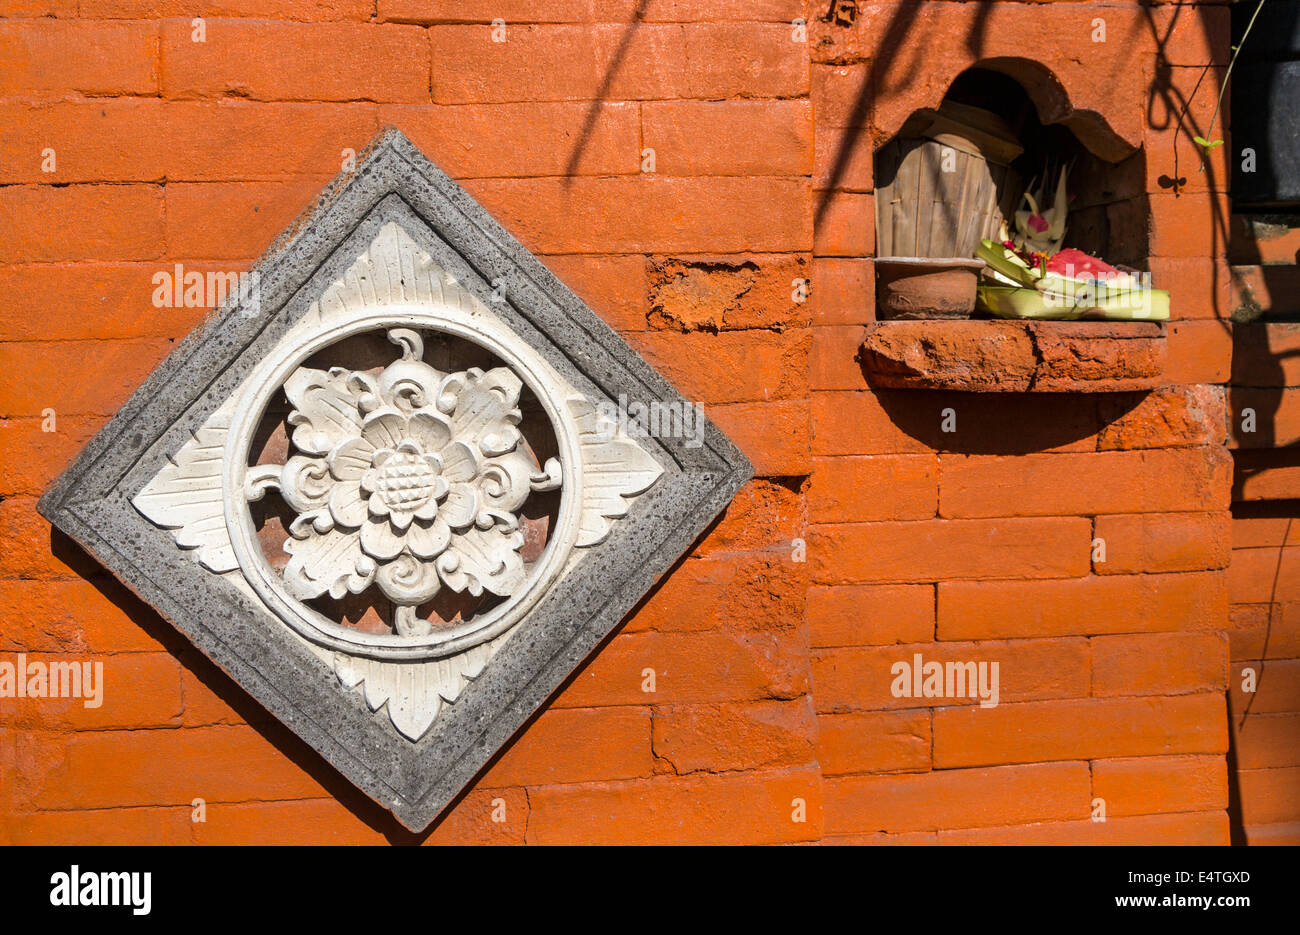 Jimbaran, Bali, Indonesia.  Offerings (Canang) in a Wall Recess Adjacent to Entrance to a Restaurant.  Lotus Flower Decoration. Stock Photo